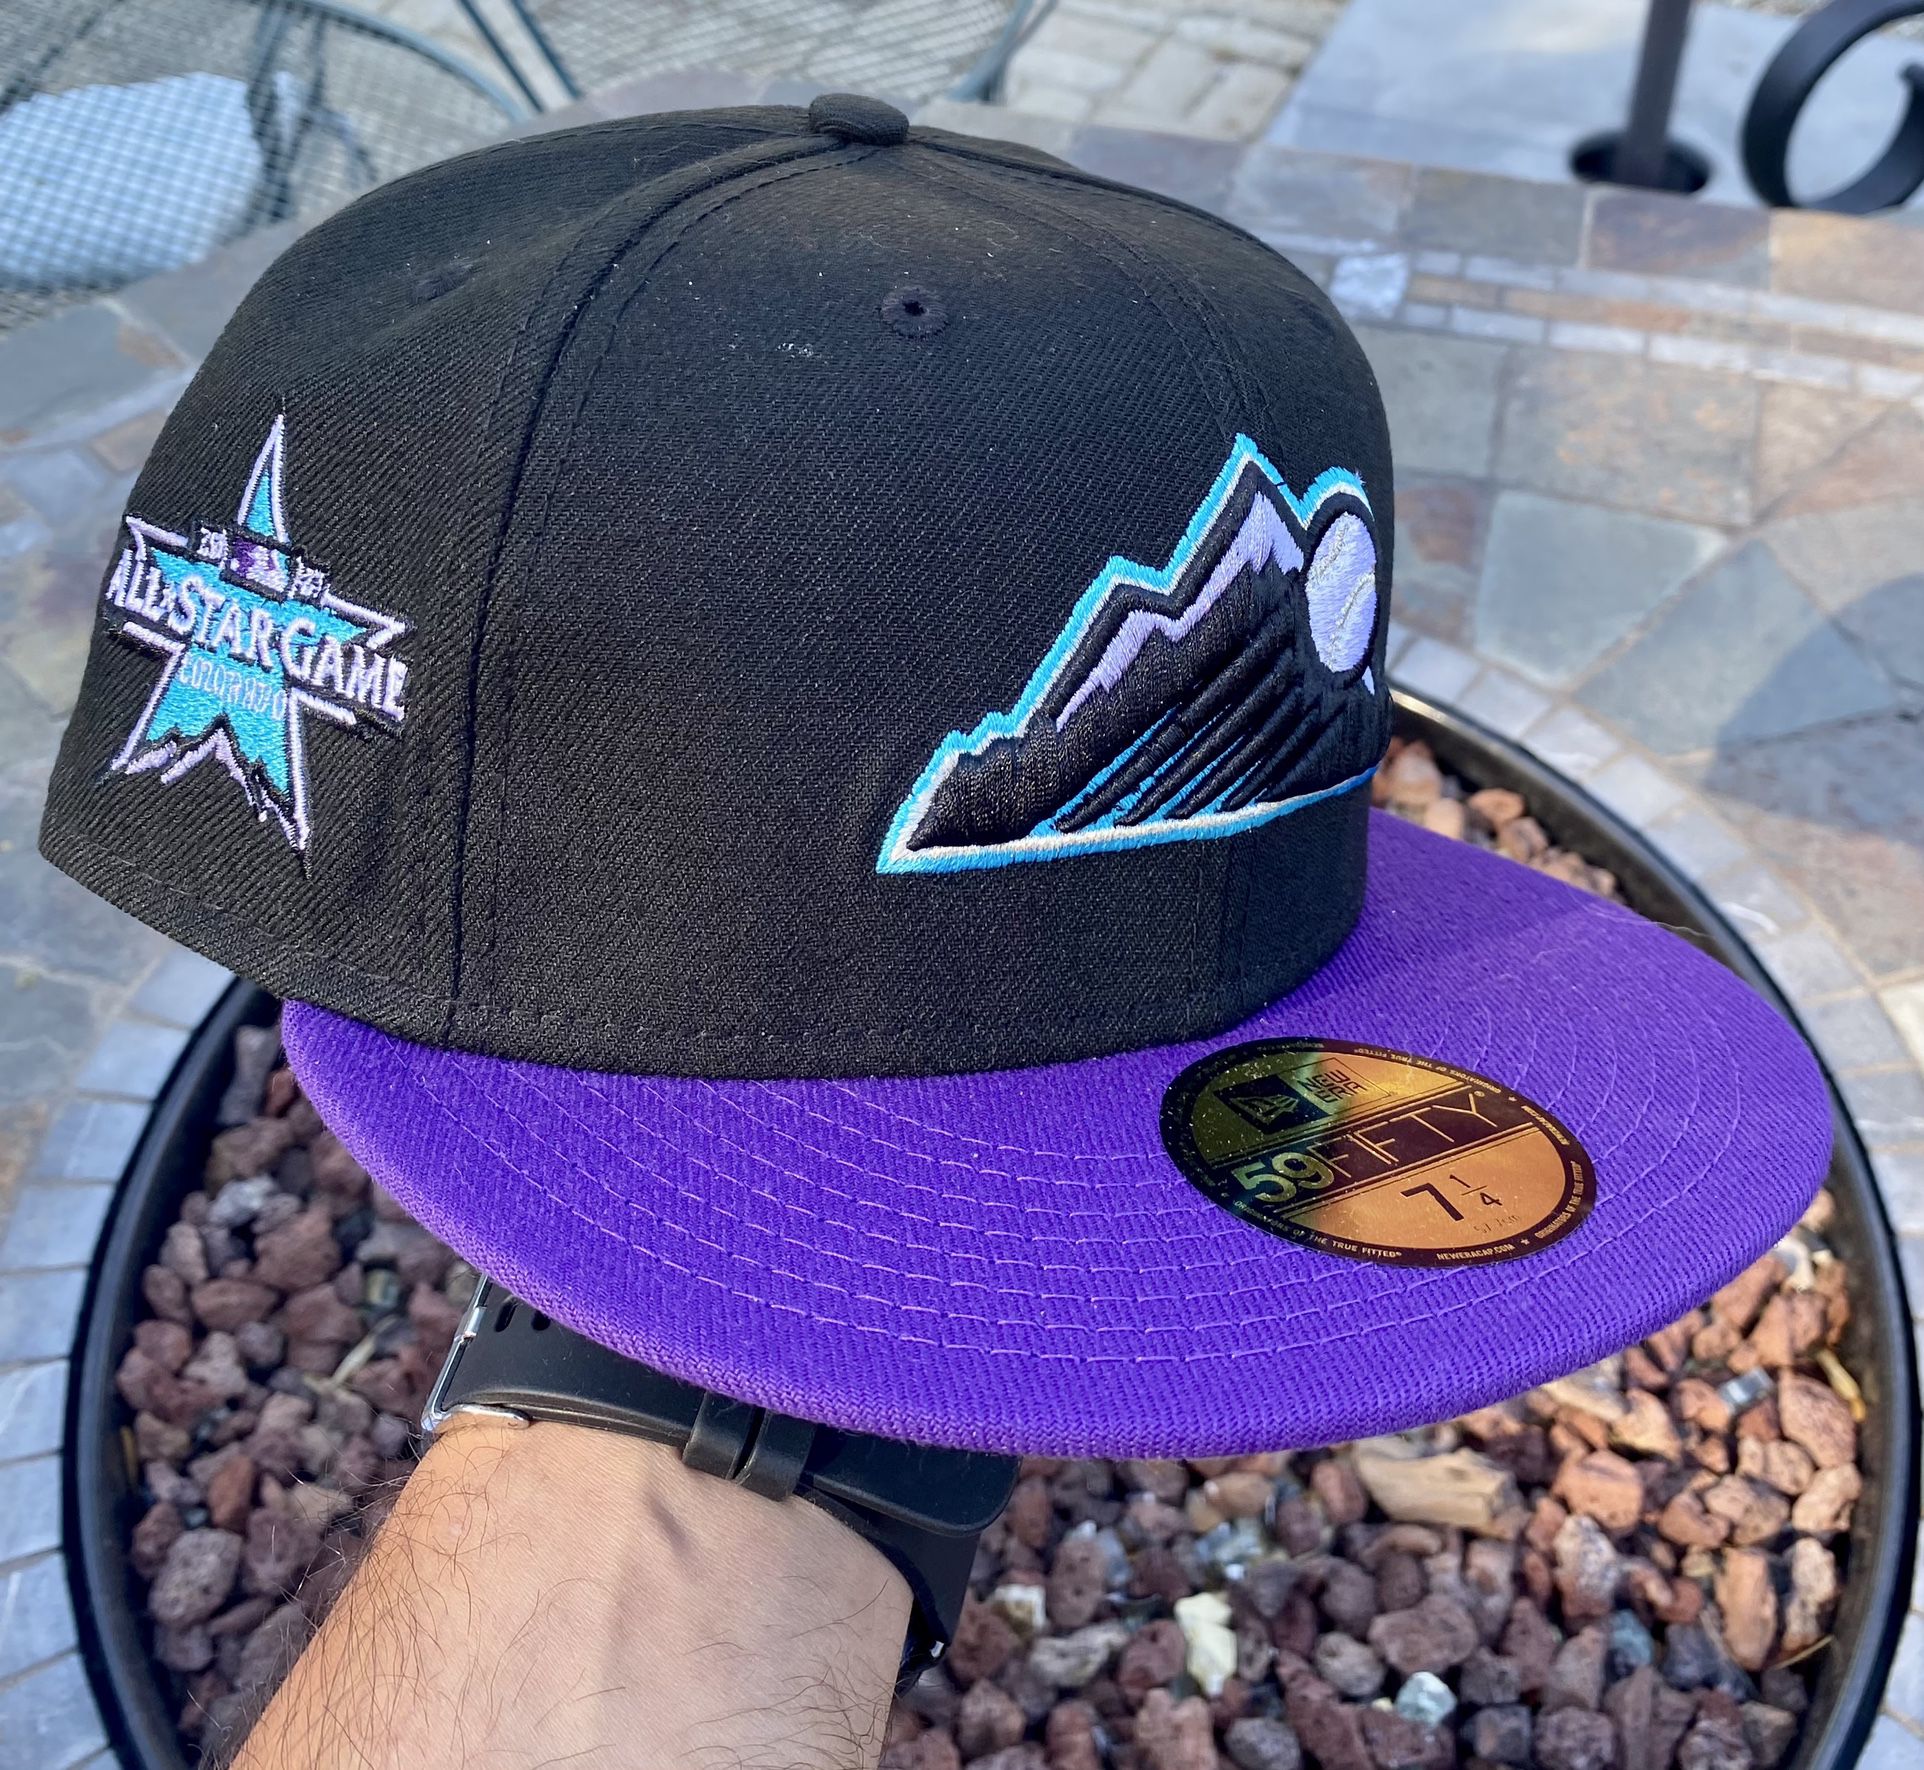 New Era Colorado Rockies Black 7 1/4 All Star Game Patch Not Hat Club Fitted